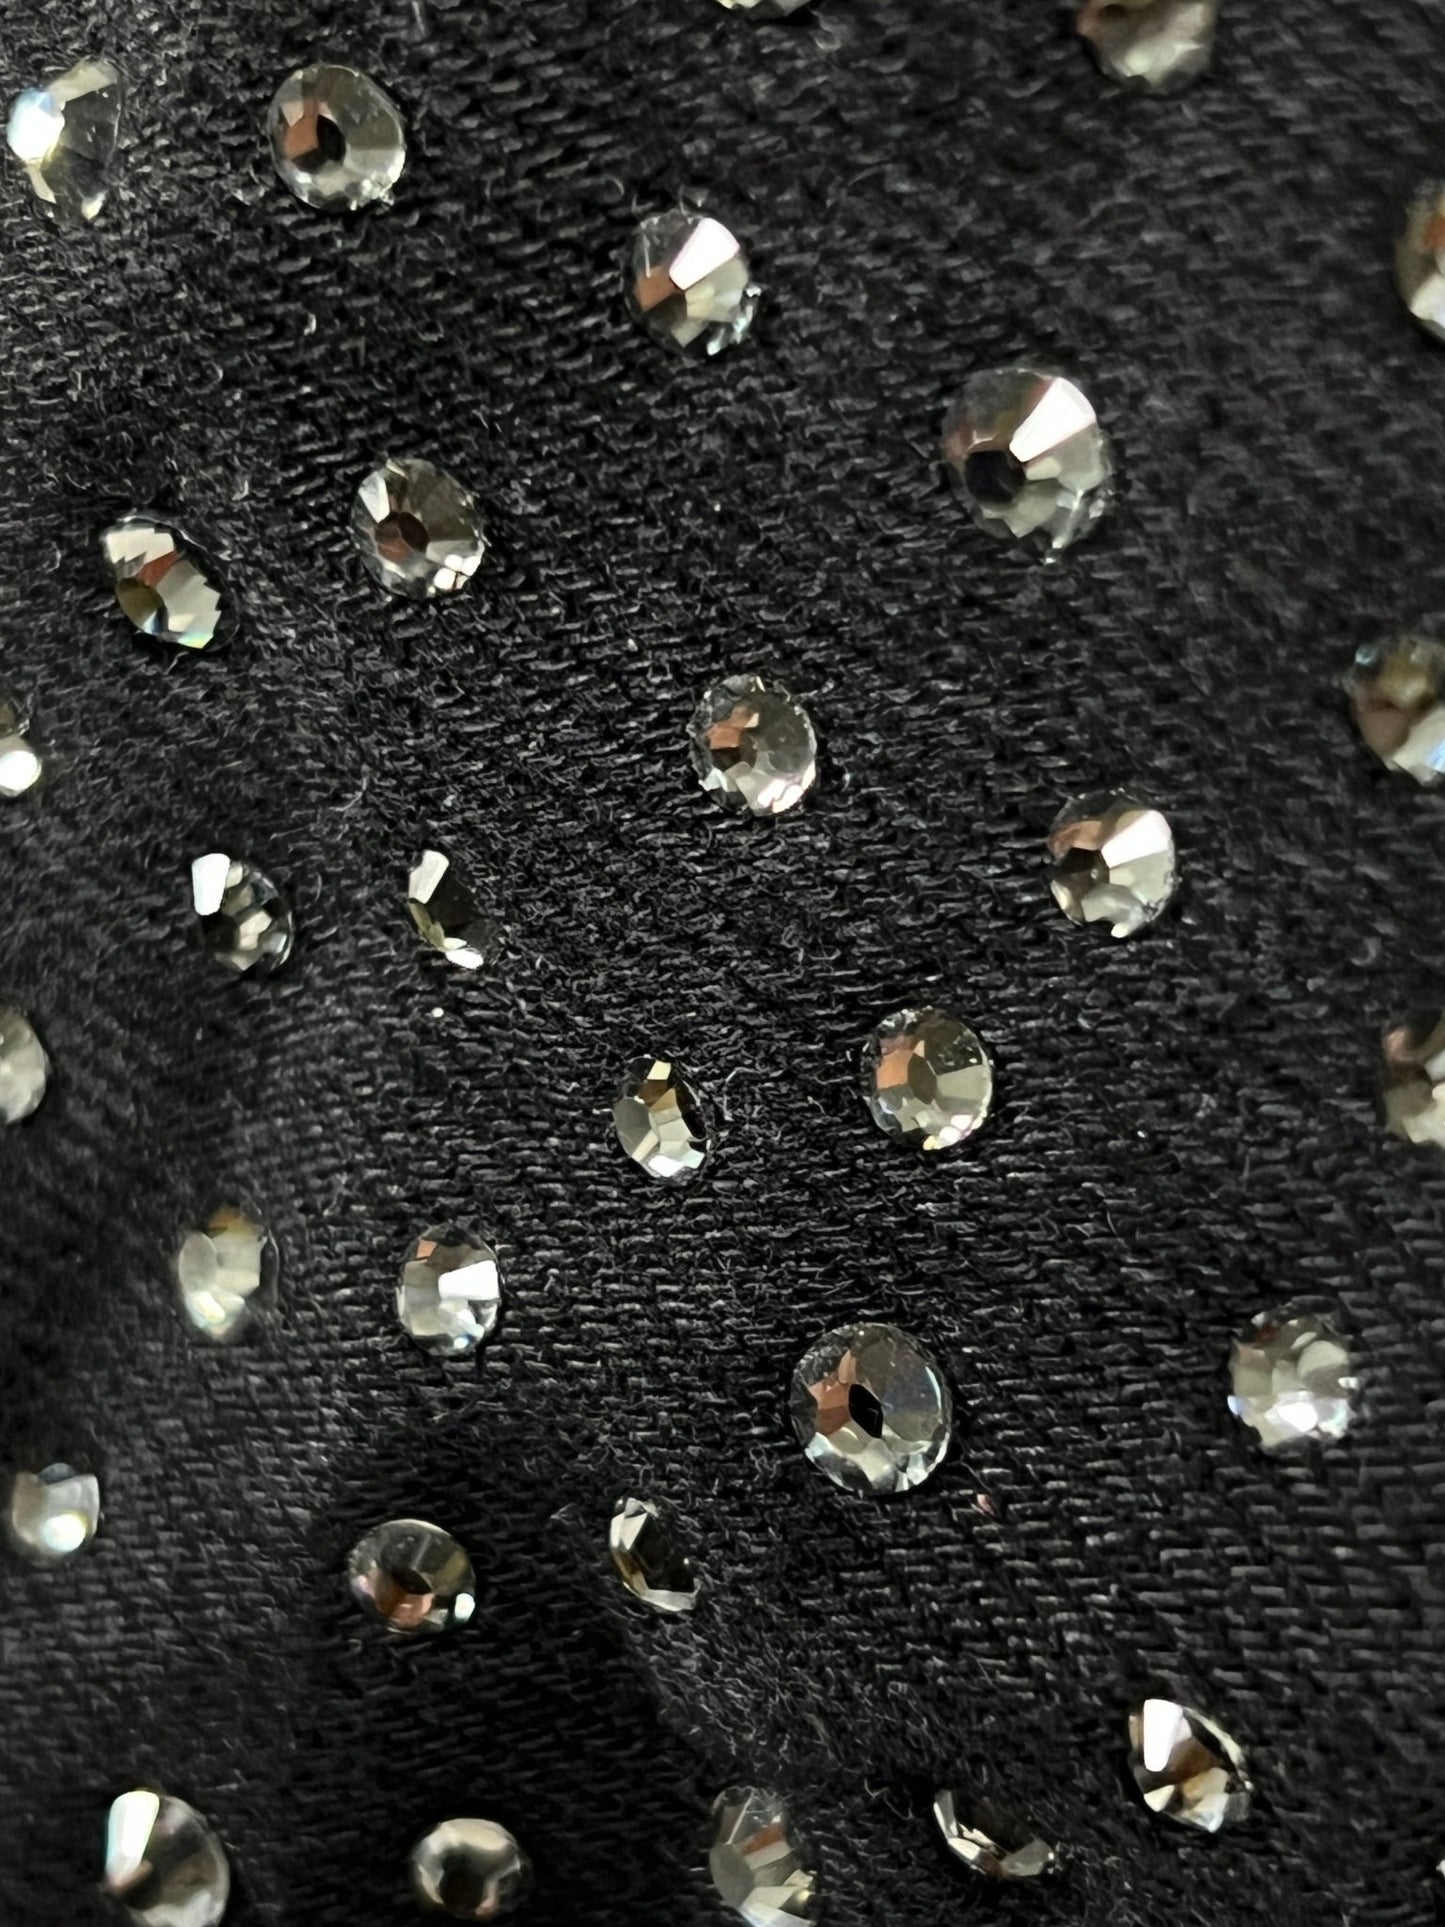 A close up of a PURPLE BRAND JEANS P015-CCBL CRYSTAL CARPENTER BLACK stretch denim fabric with crystal-studded rhinestones on it.